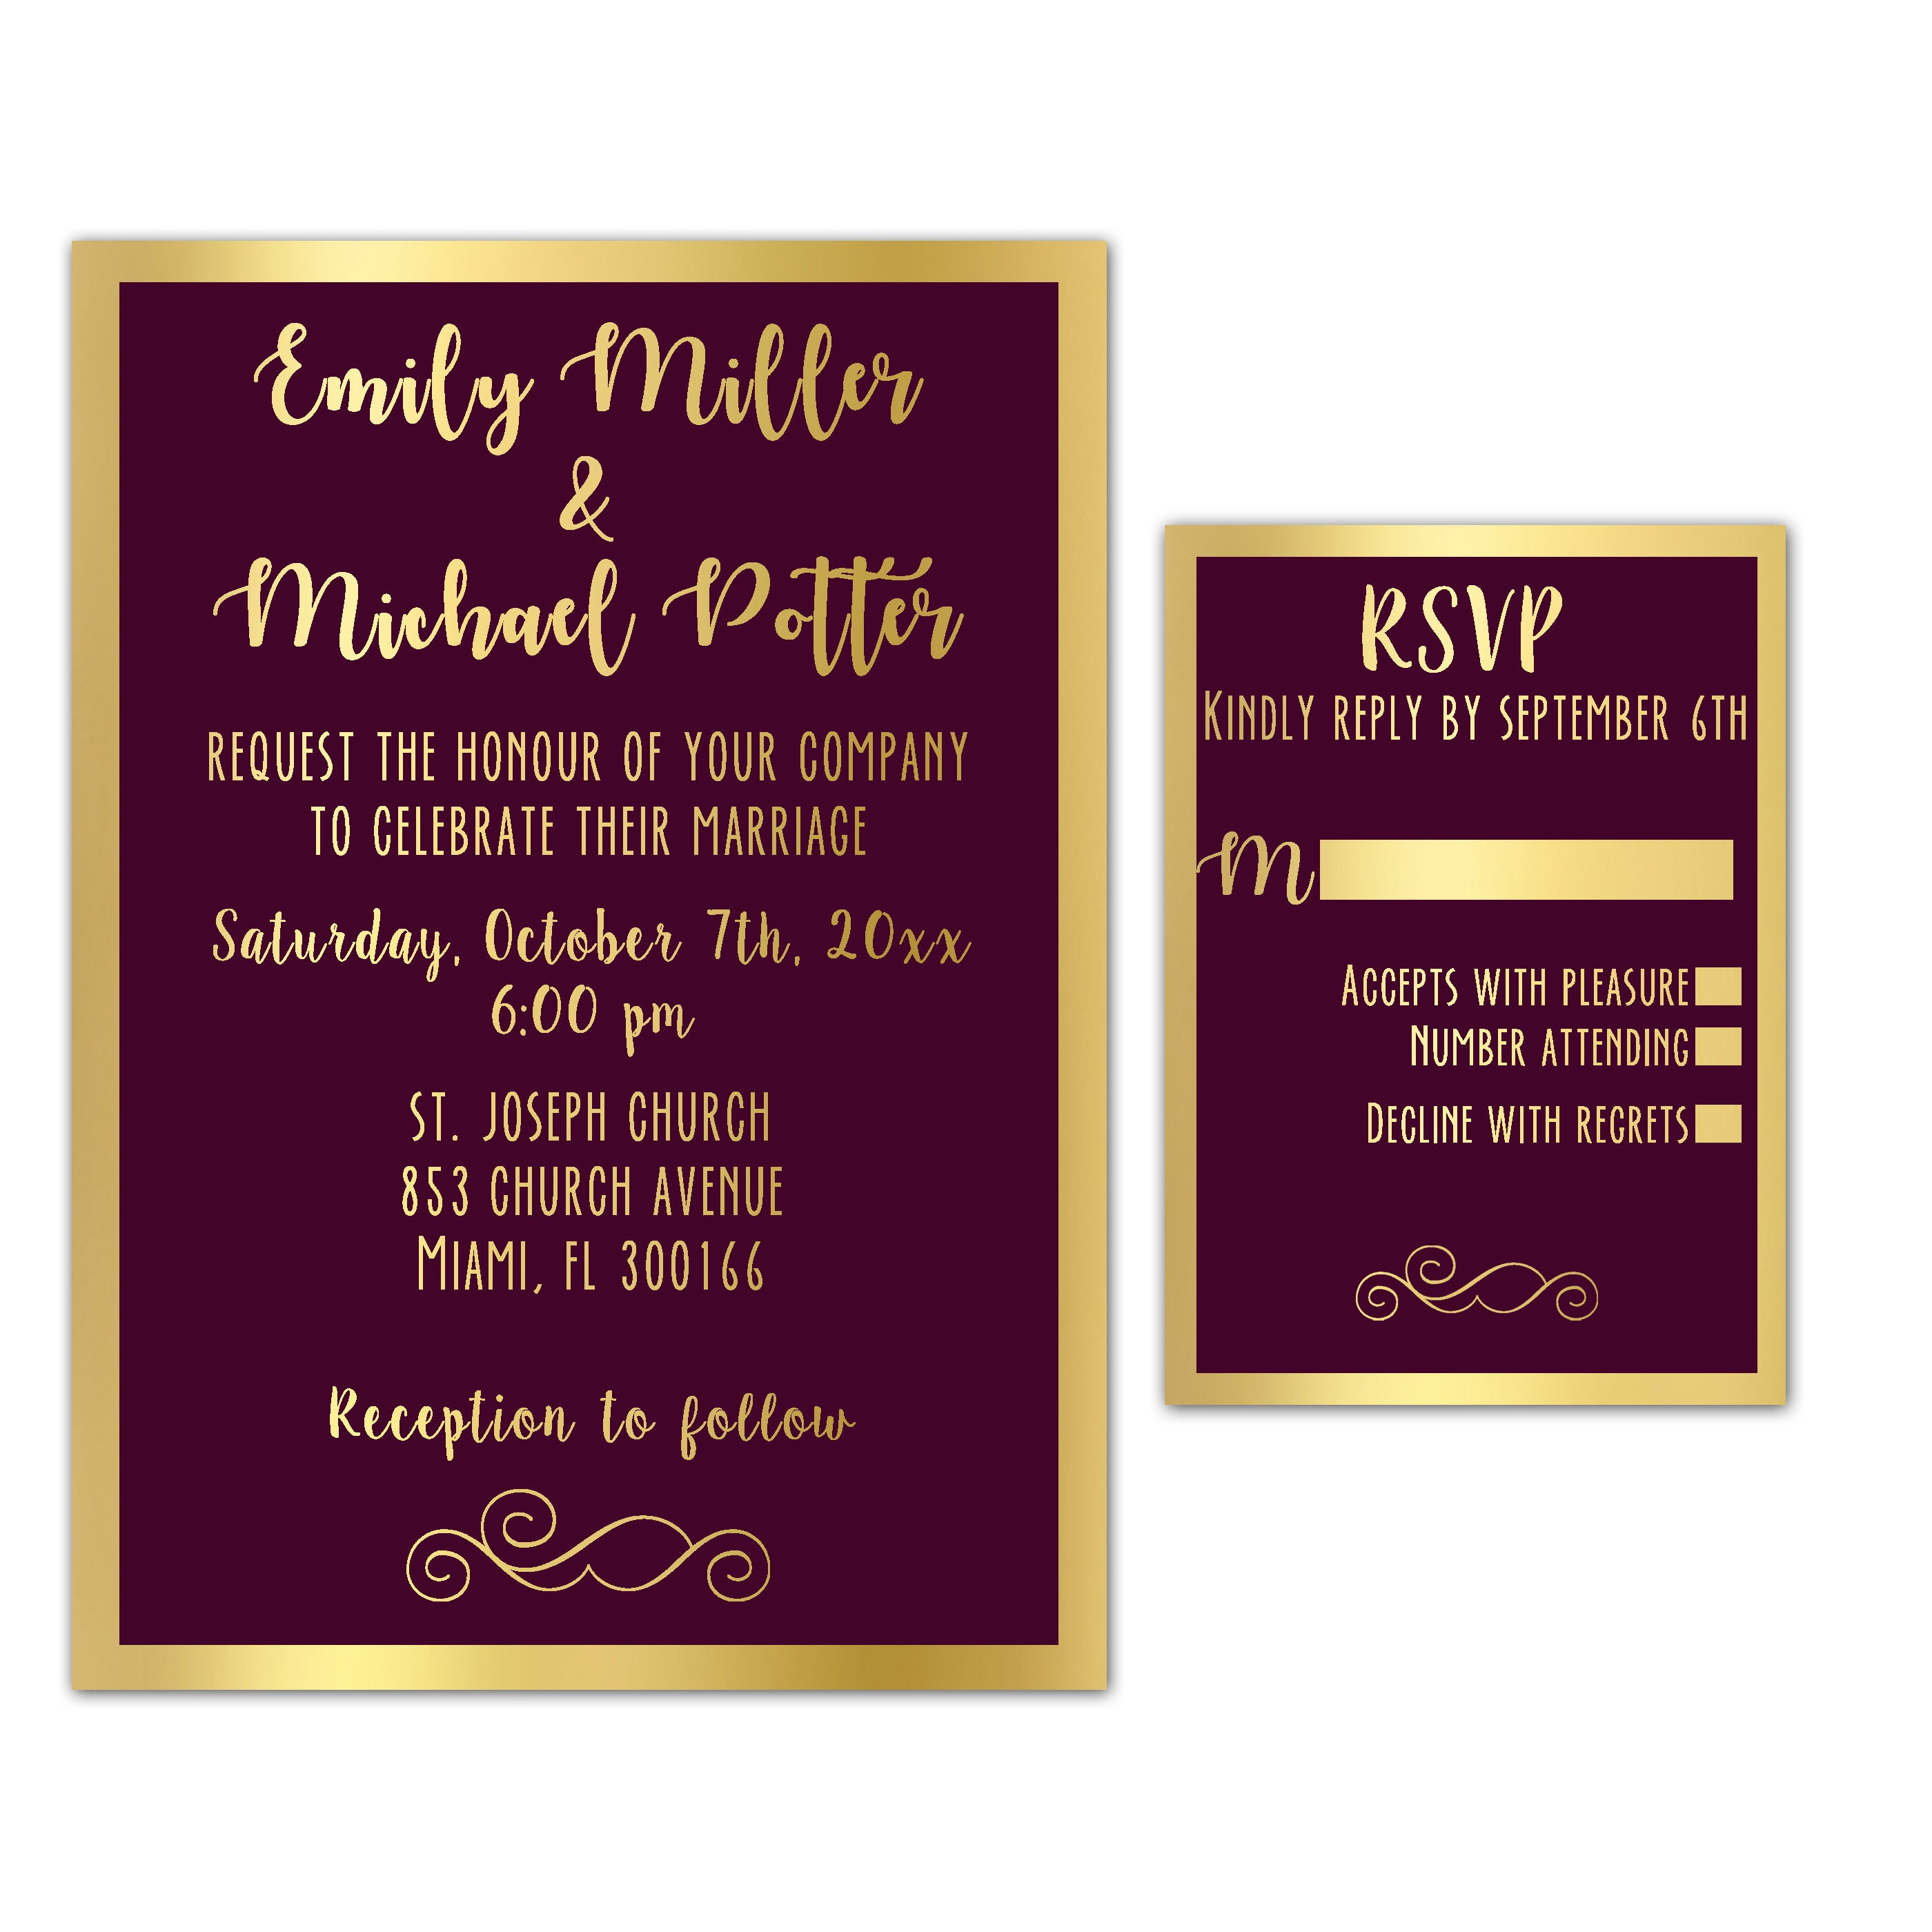 Burgundy Gold Wedding Invitation - Wine Red Card Invite Printable With Rsvp